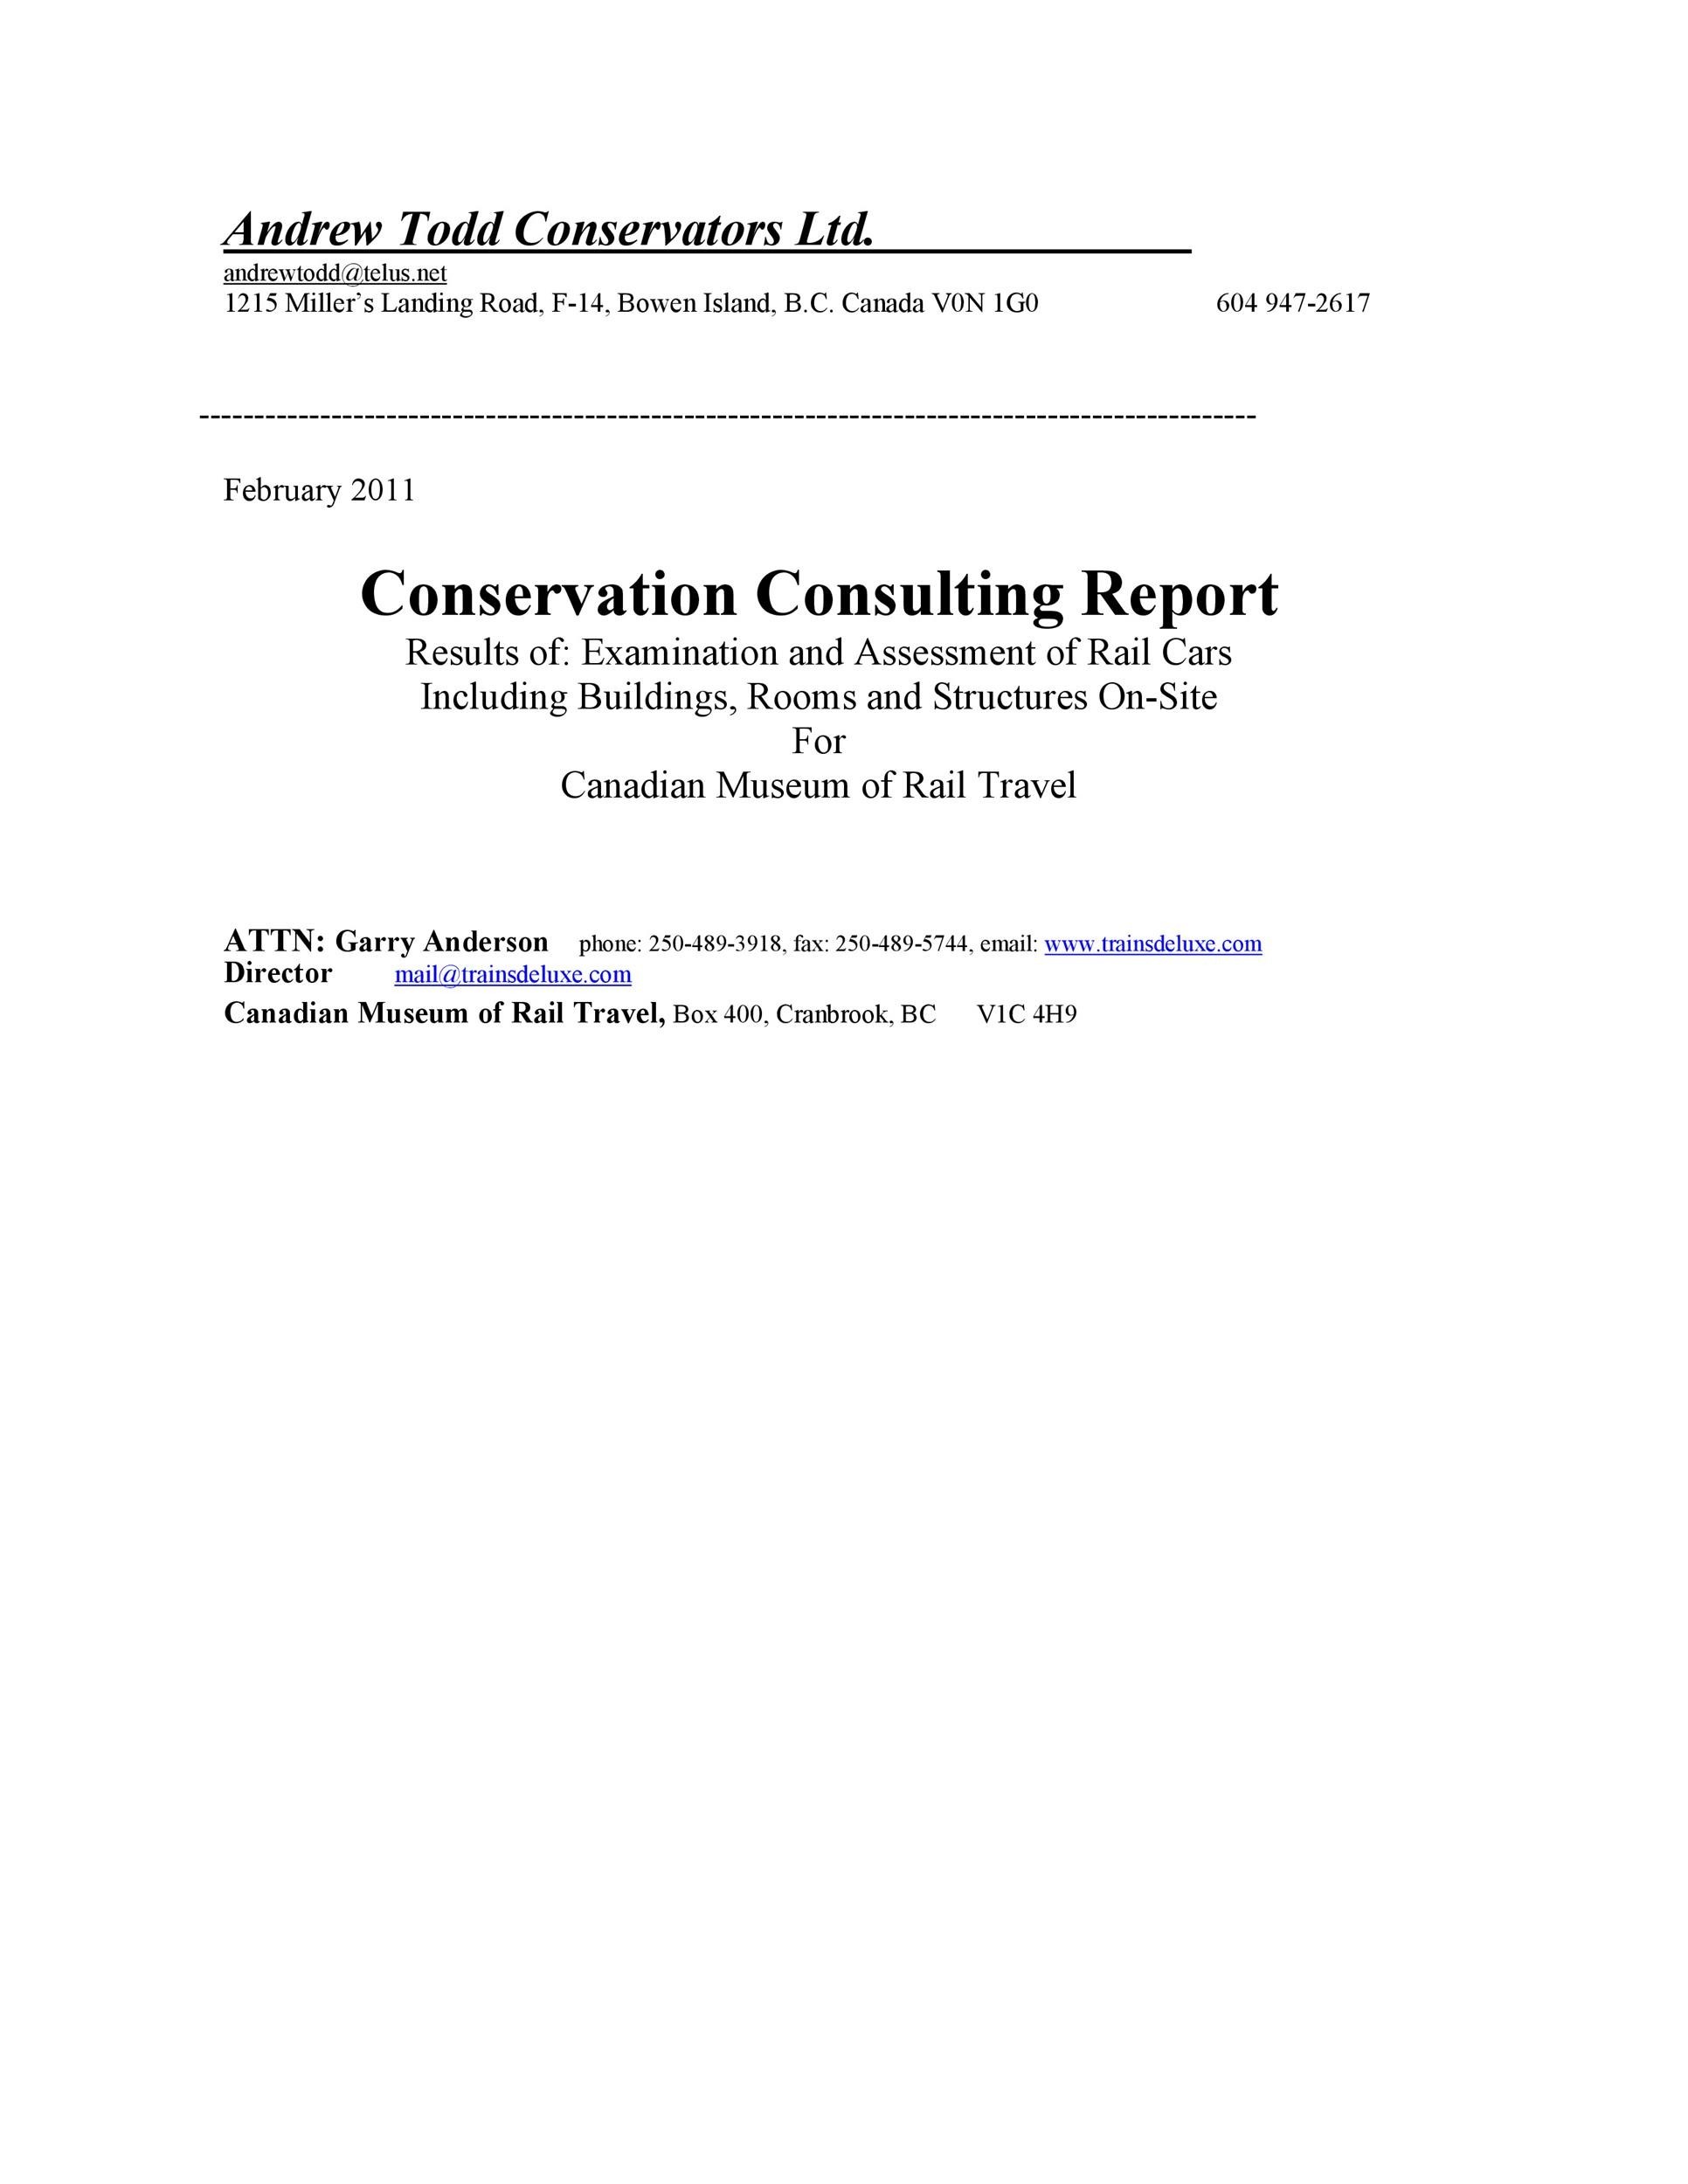 Free consulting report template 10